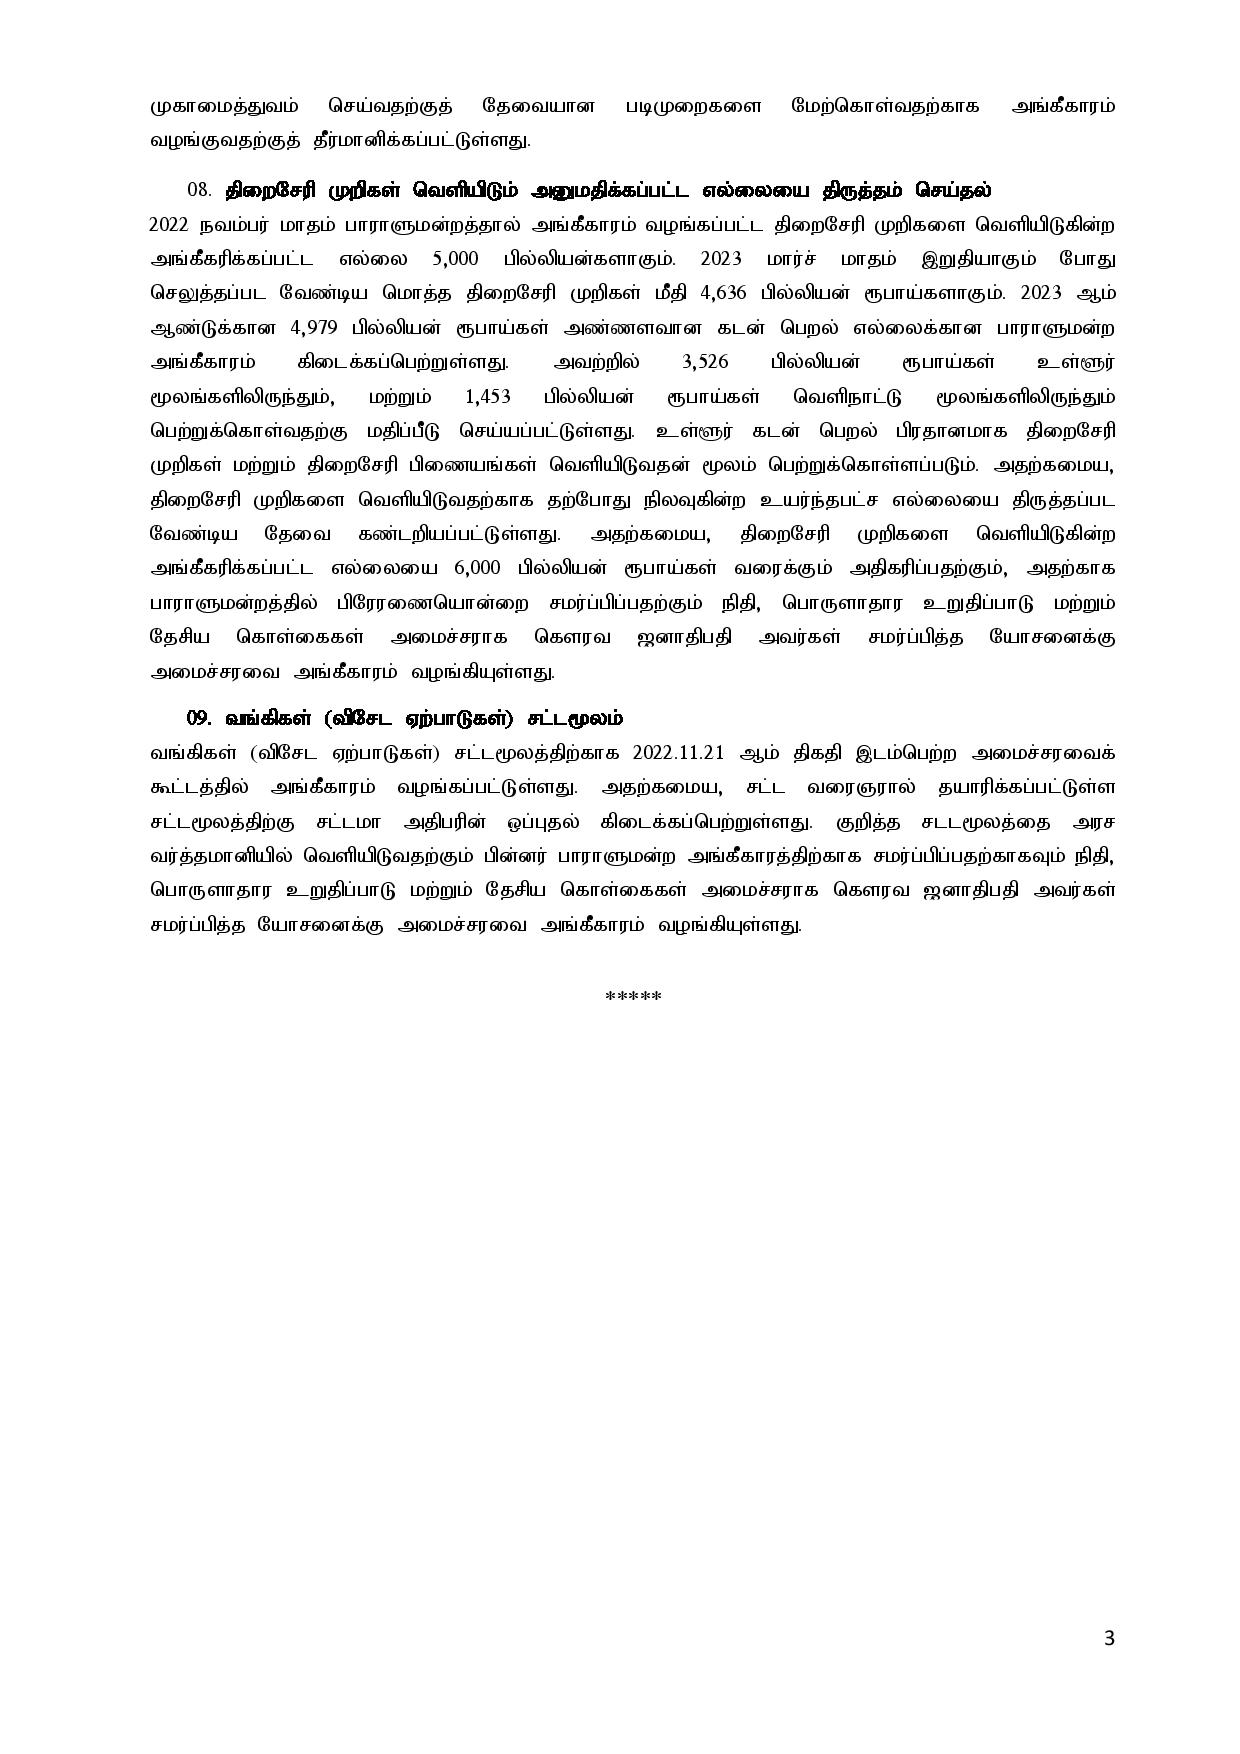 Cabinet Decisions on 02.05.2023 Tamil page 003